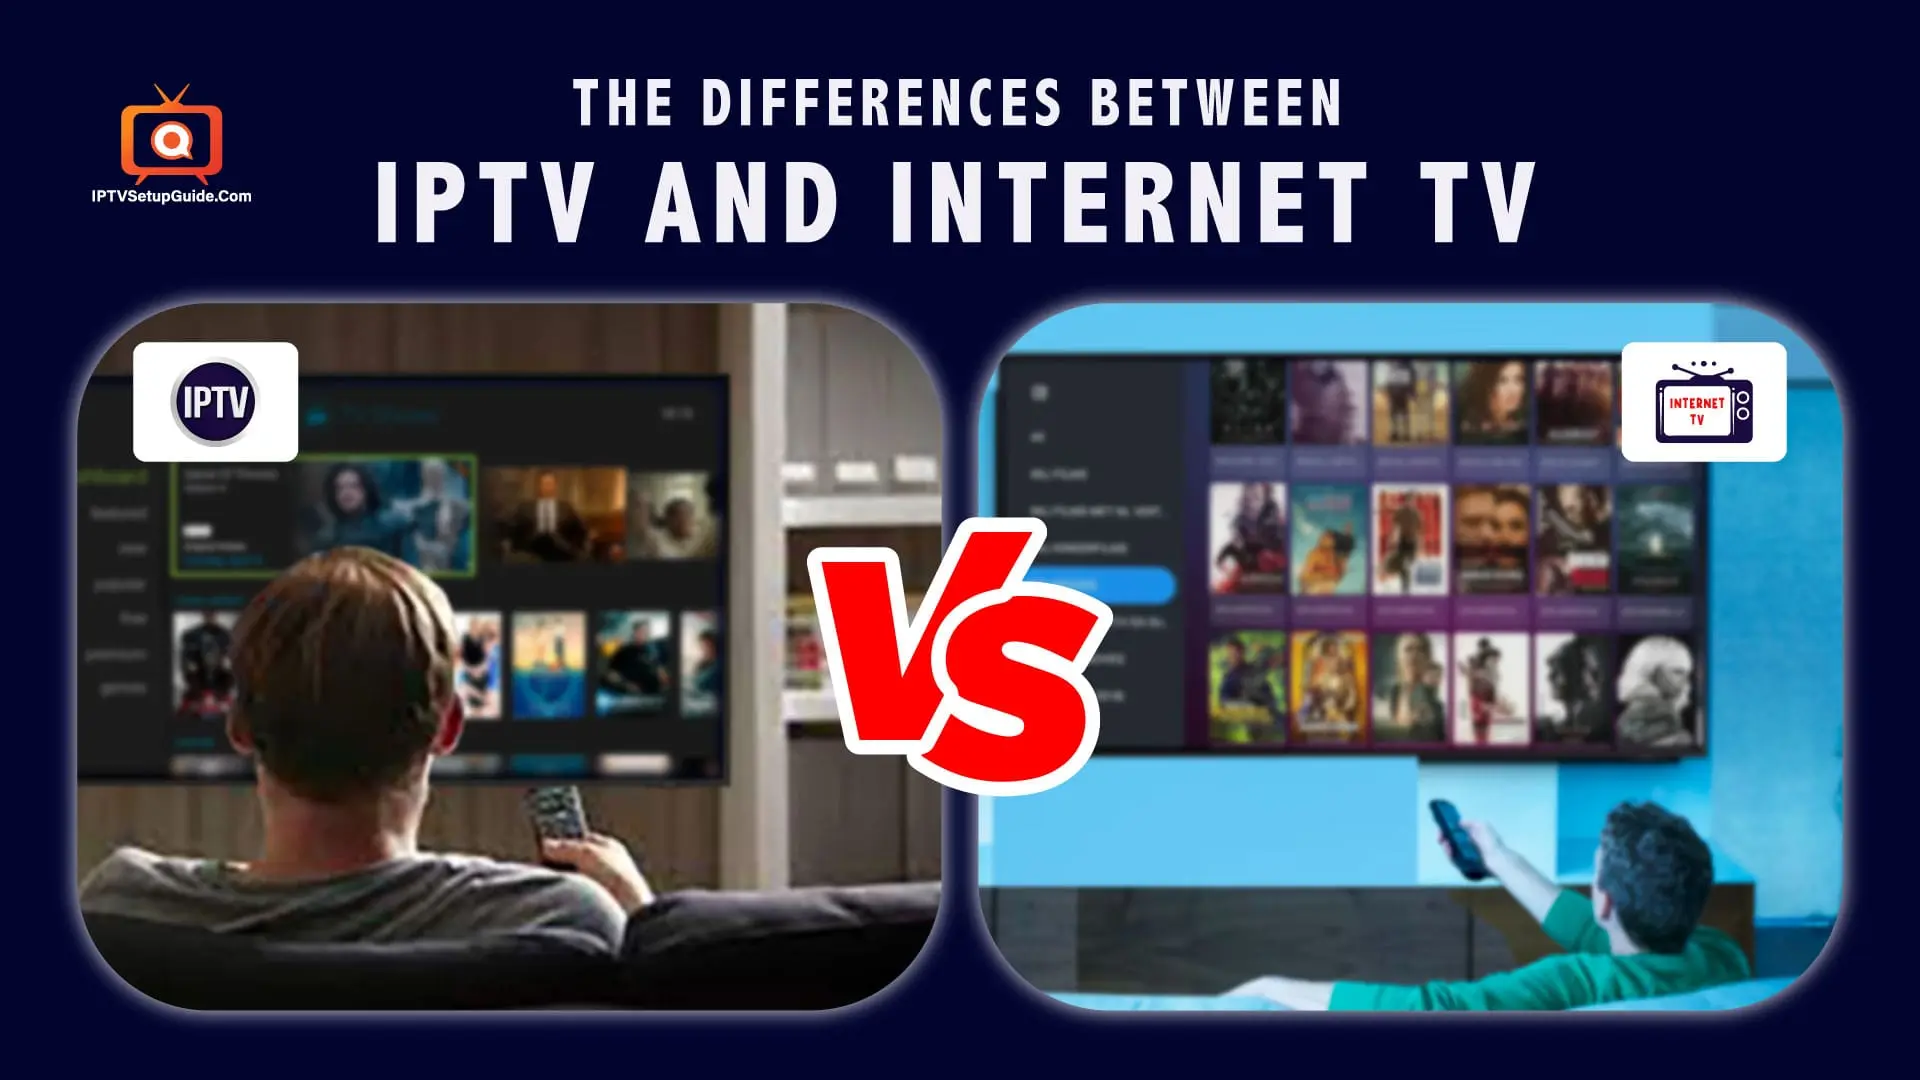 The differences between IPTV and Internet TV